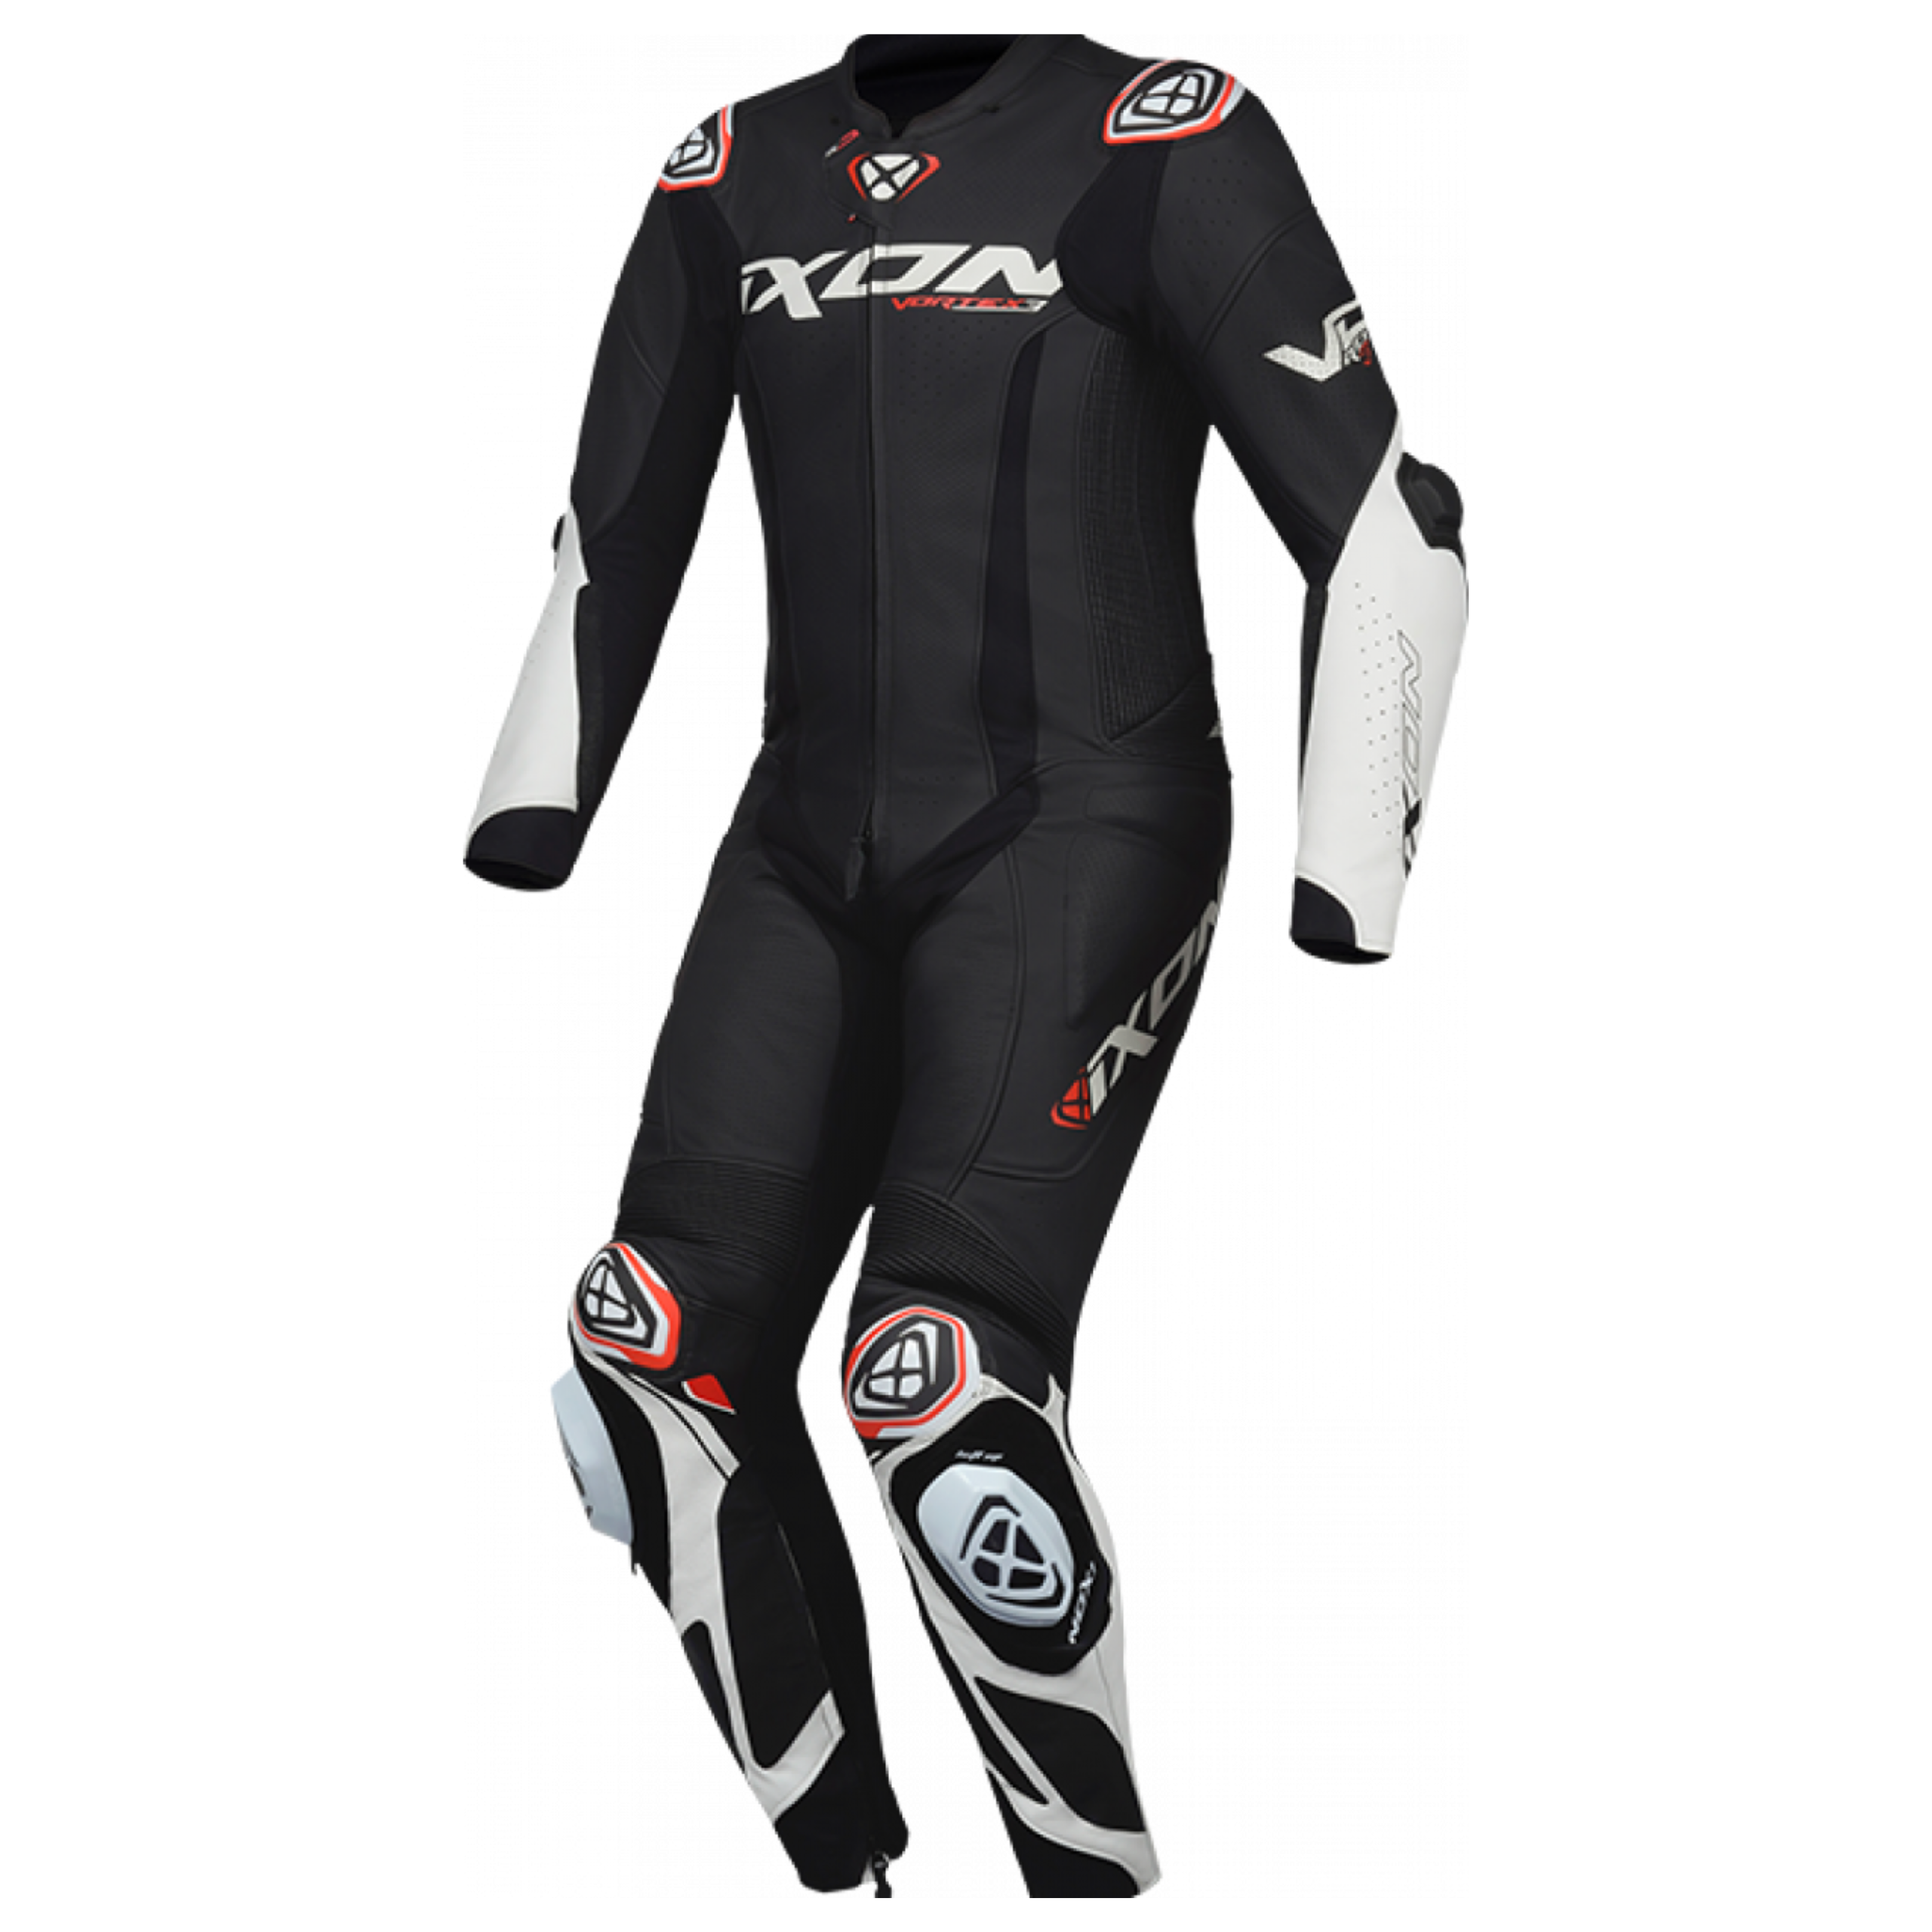 Ixon Vortex 3 motorcycle suit, compatible with In&motion airbag